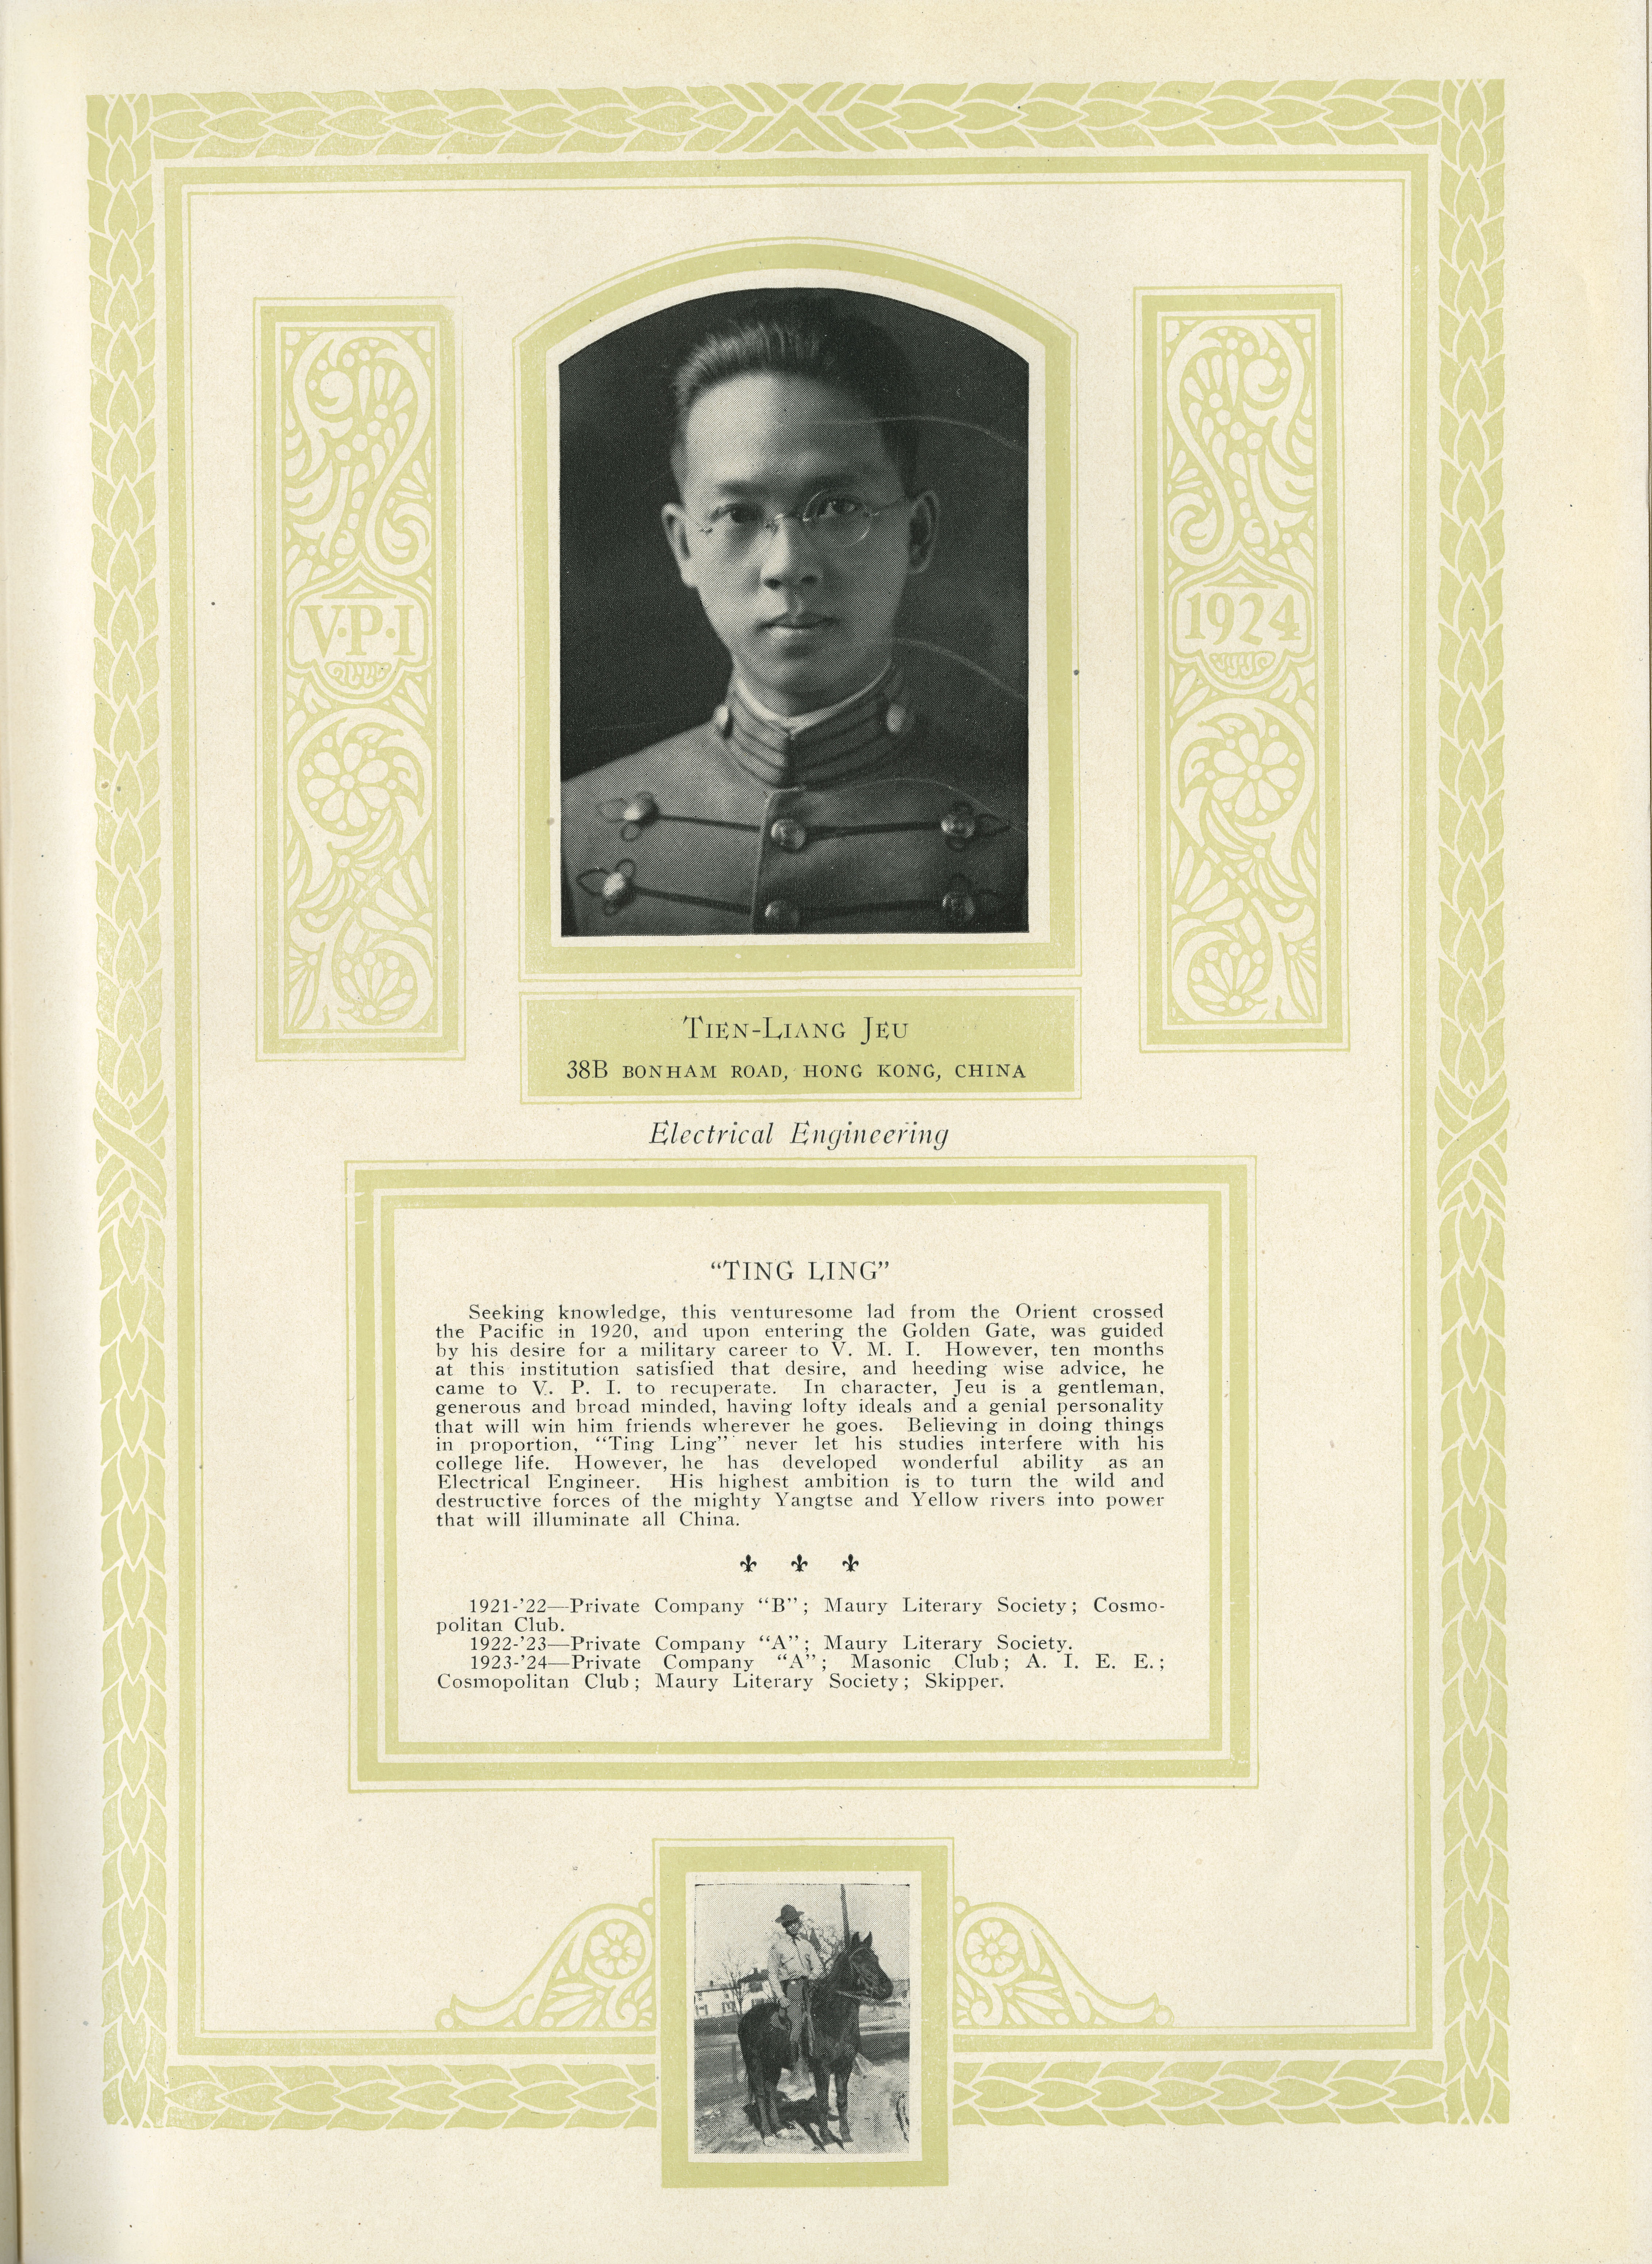 image of the yearbook page relating to tien-Liang Jeu